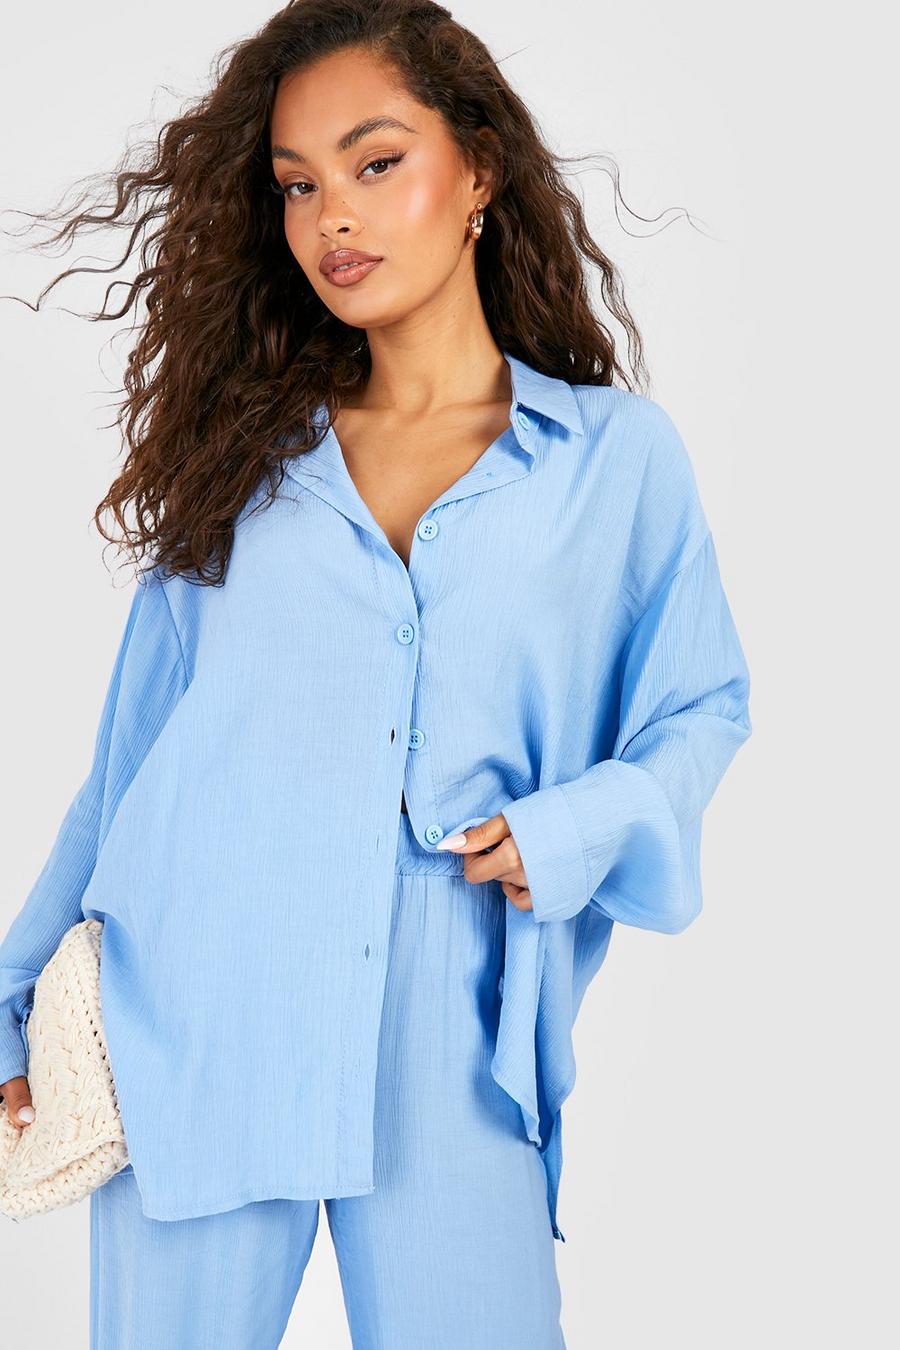 Sky blue Crinkle Relaxed Fit Shirt